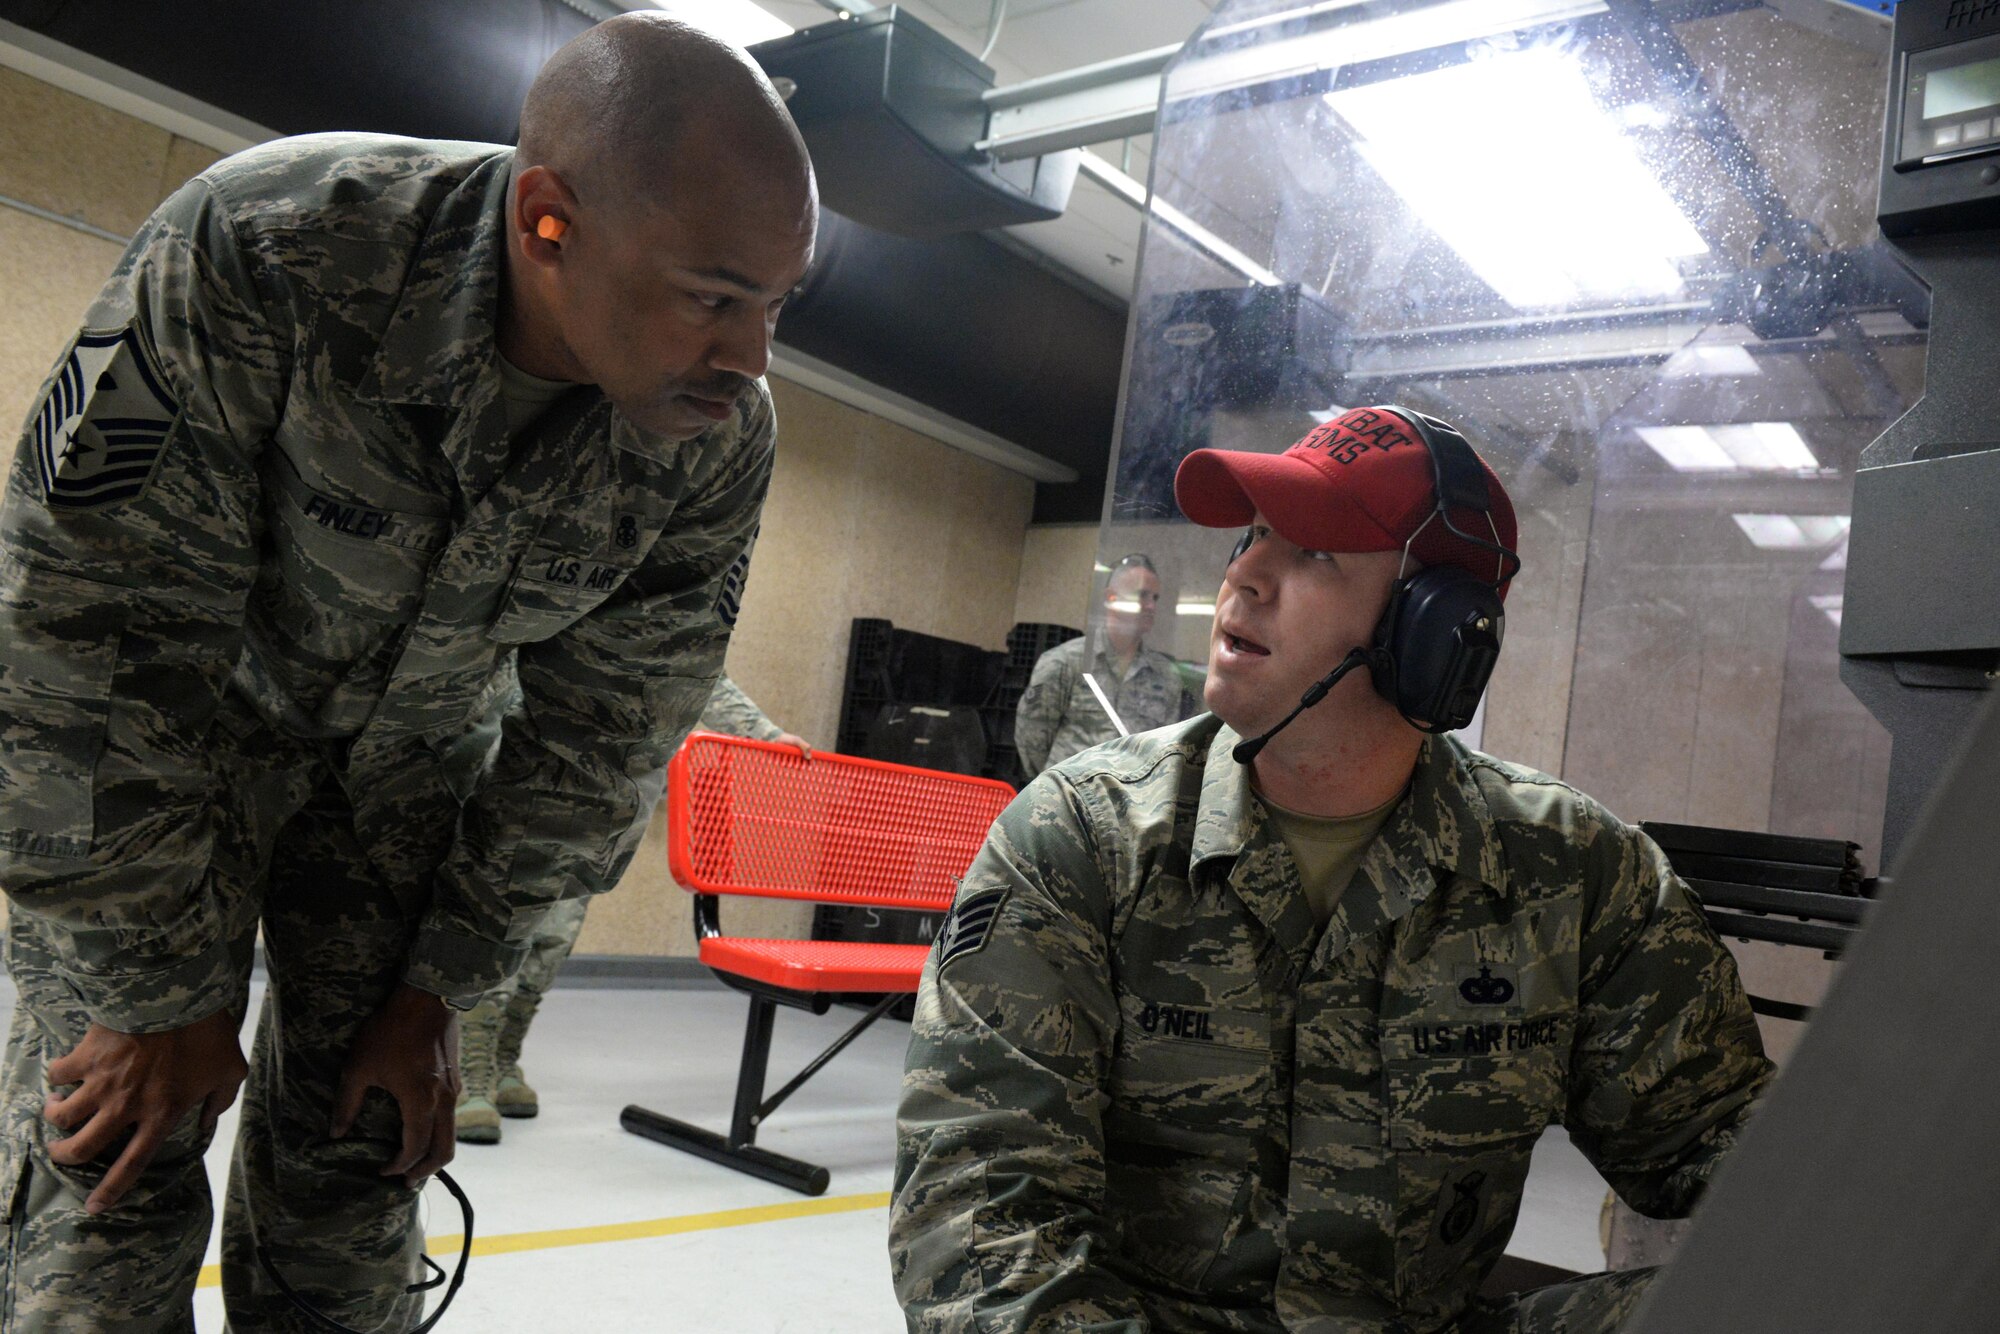 Staff Sgt. Michael O’Neil, 81st Security Forces Squadron combat arms instructor, gives feedback to Master Sgt. Leslie Finley, 81st Logistics Readiness Squadron first sergeant, following a live fire qualification session at the Combat Arms Training and Maintenance building March 9, 2016, Keesler Air Force Base, Miss. CATM instructors are in charge of student safety throughout the course and correcting shooters after all live fire has stopped. (U.S. Air Force photo by Airman 1st Class Travis Beihl)